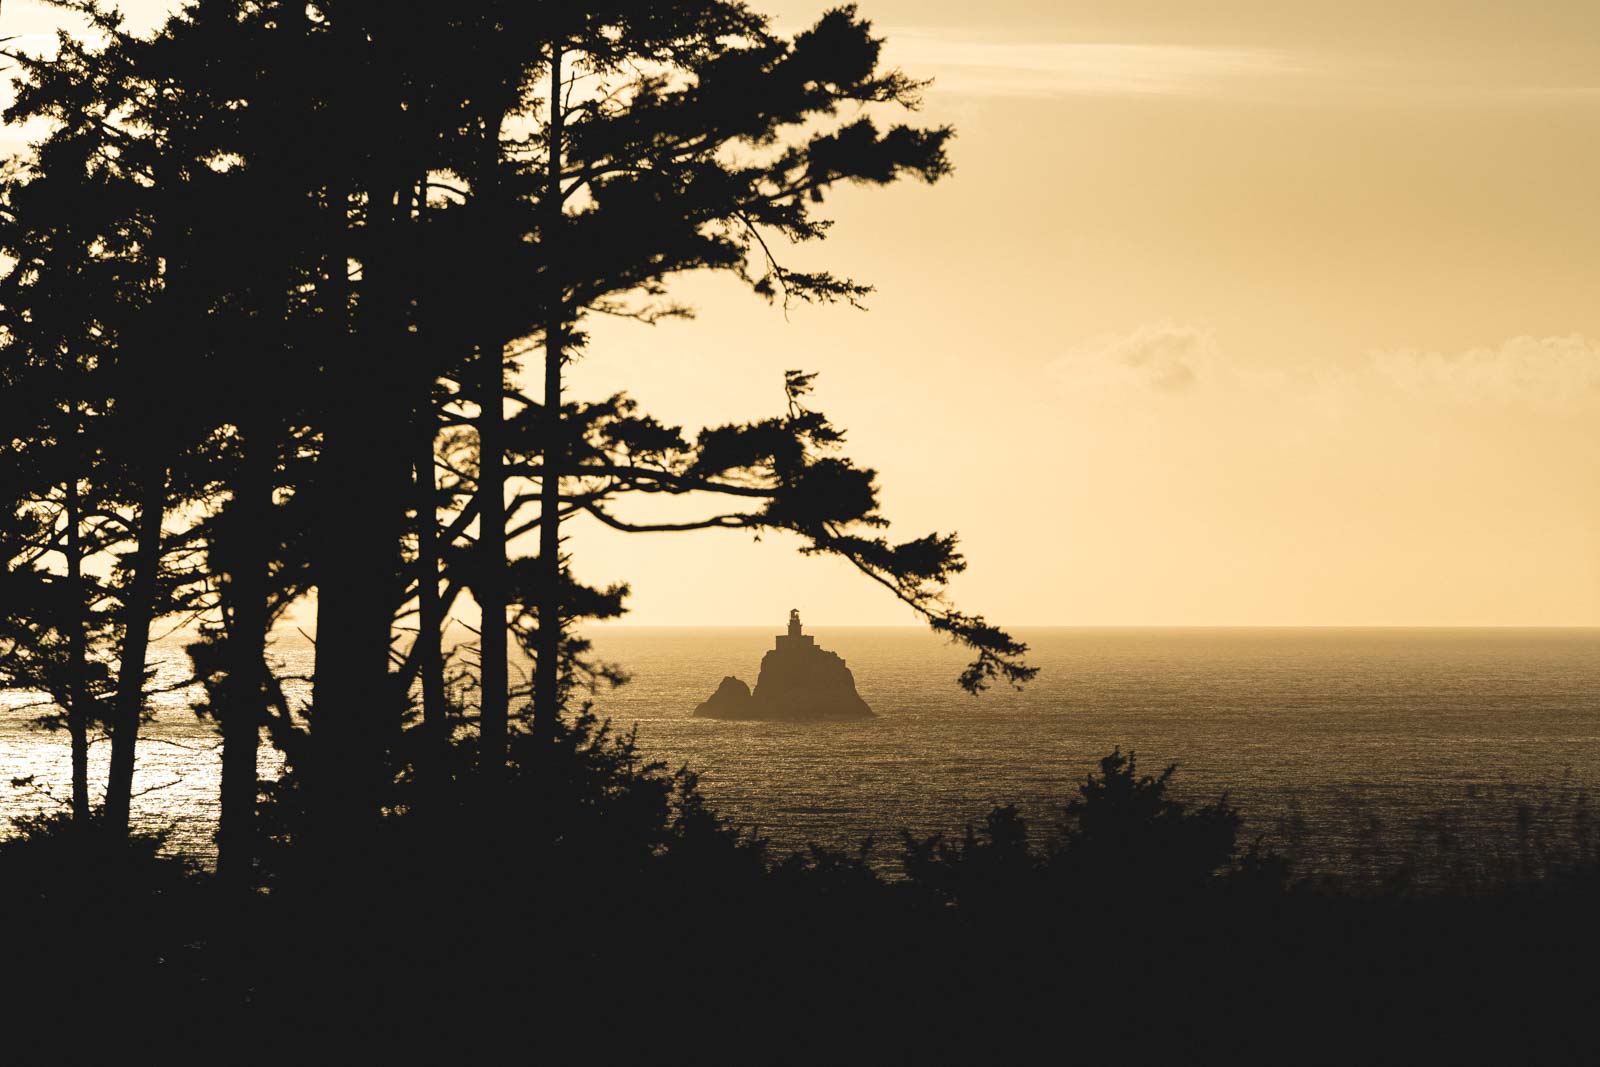 View through trees to Tillamook Rock Lighthouse surrounded by ocean, one of the most scenic Oregon Lighthouses